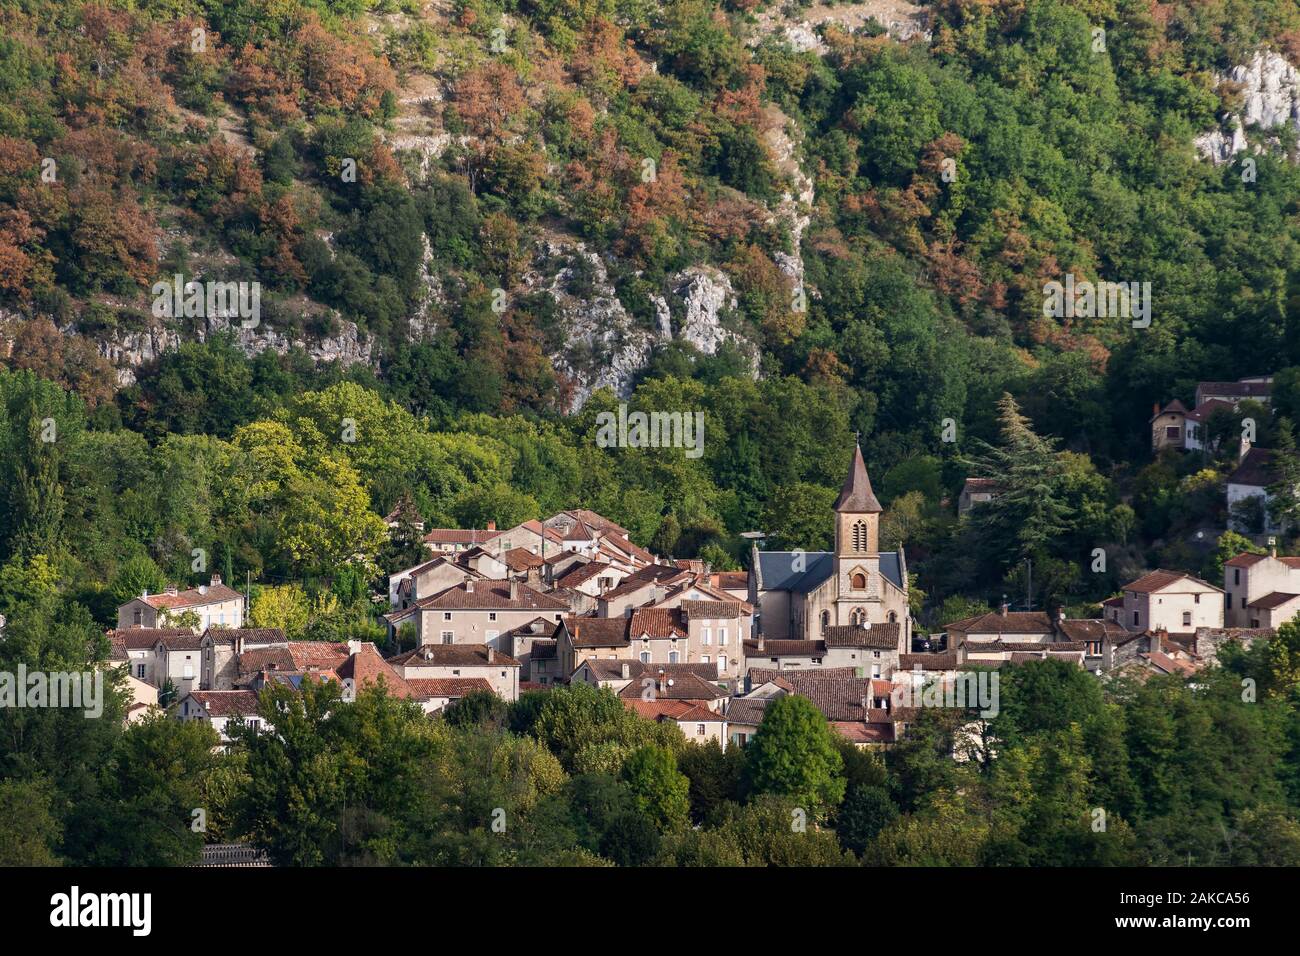 France, Occitania, Lot departement, Geopark of Quercy, Vers Village on Lot valley Stock Photo